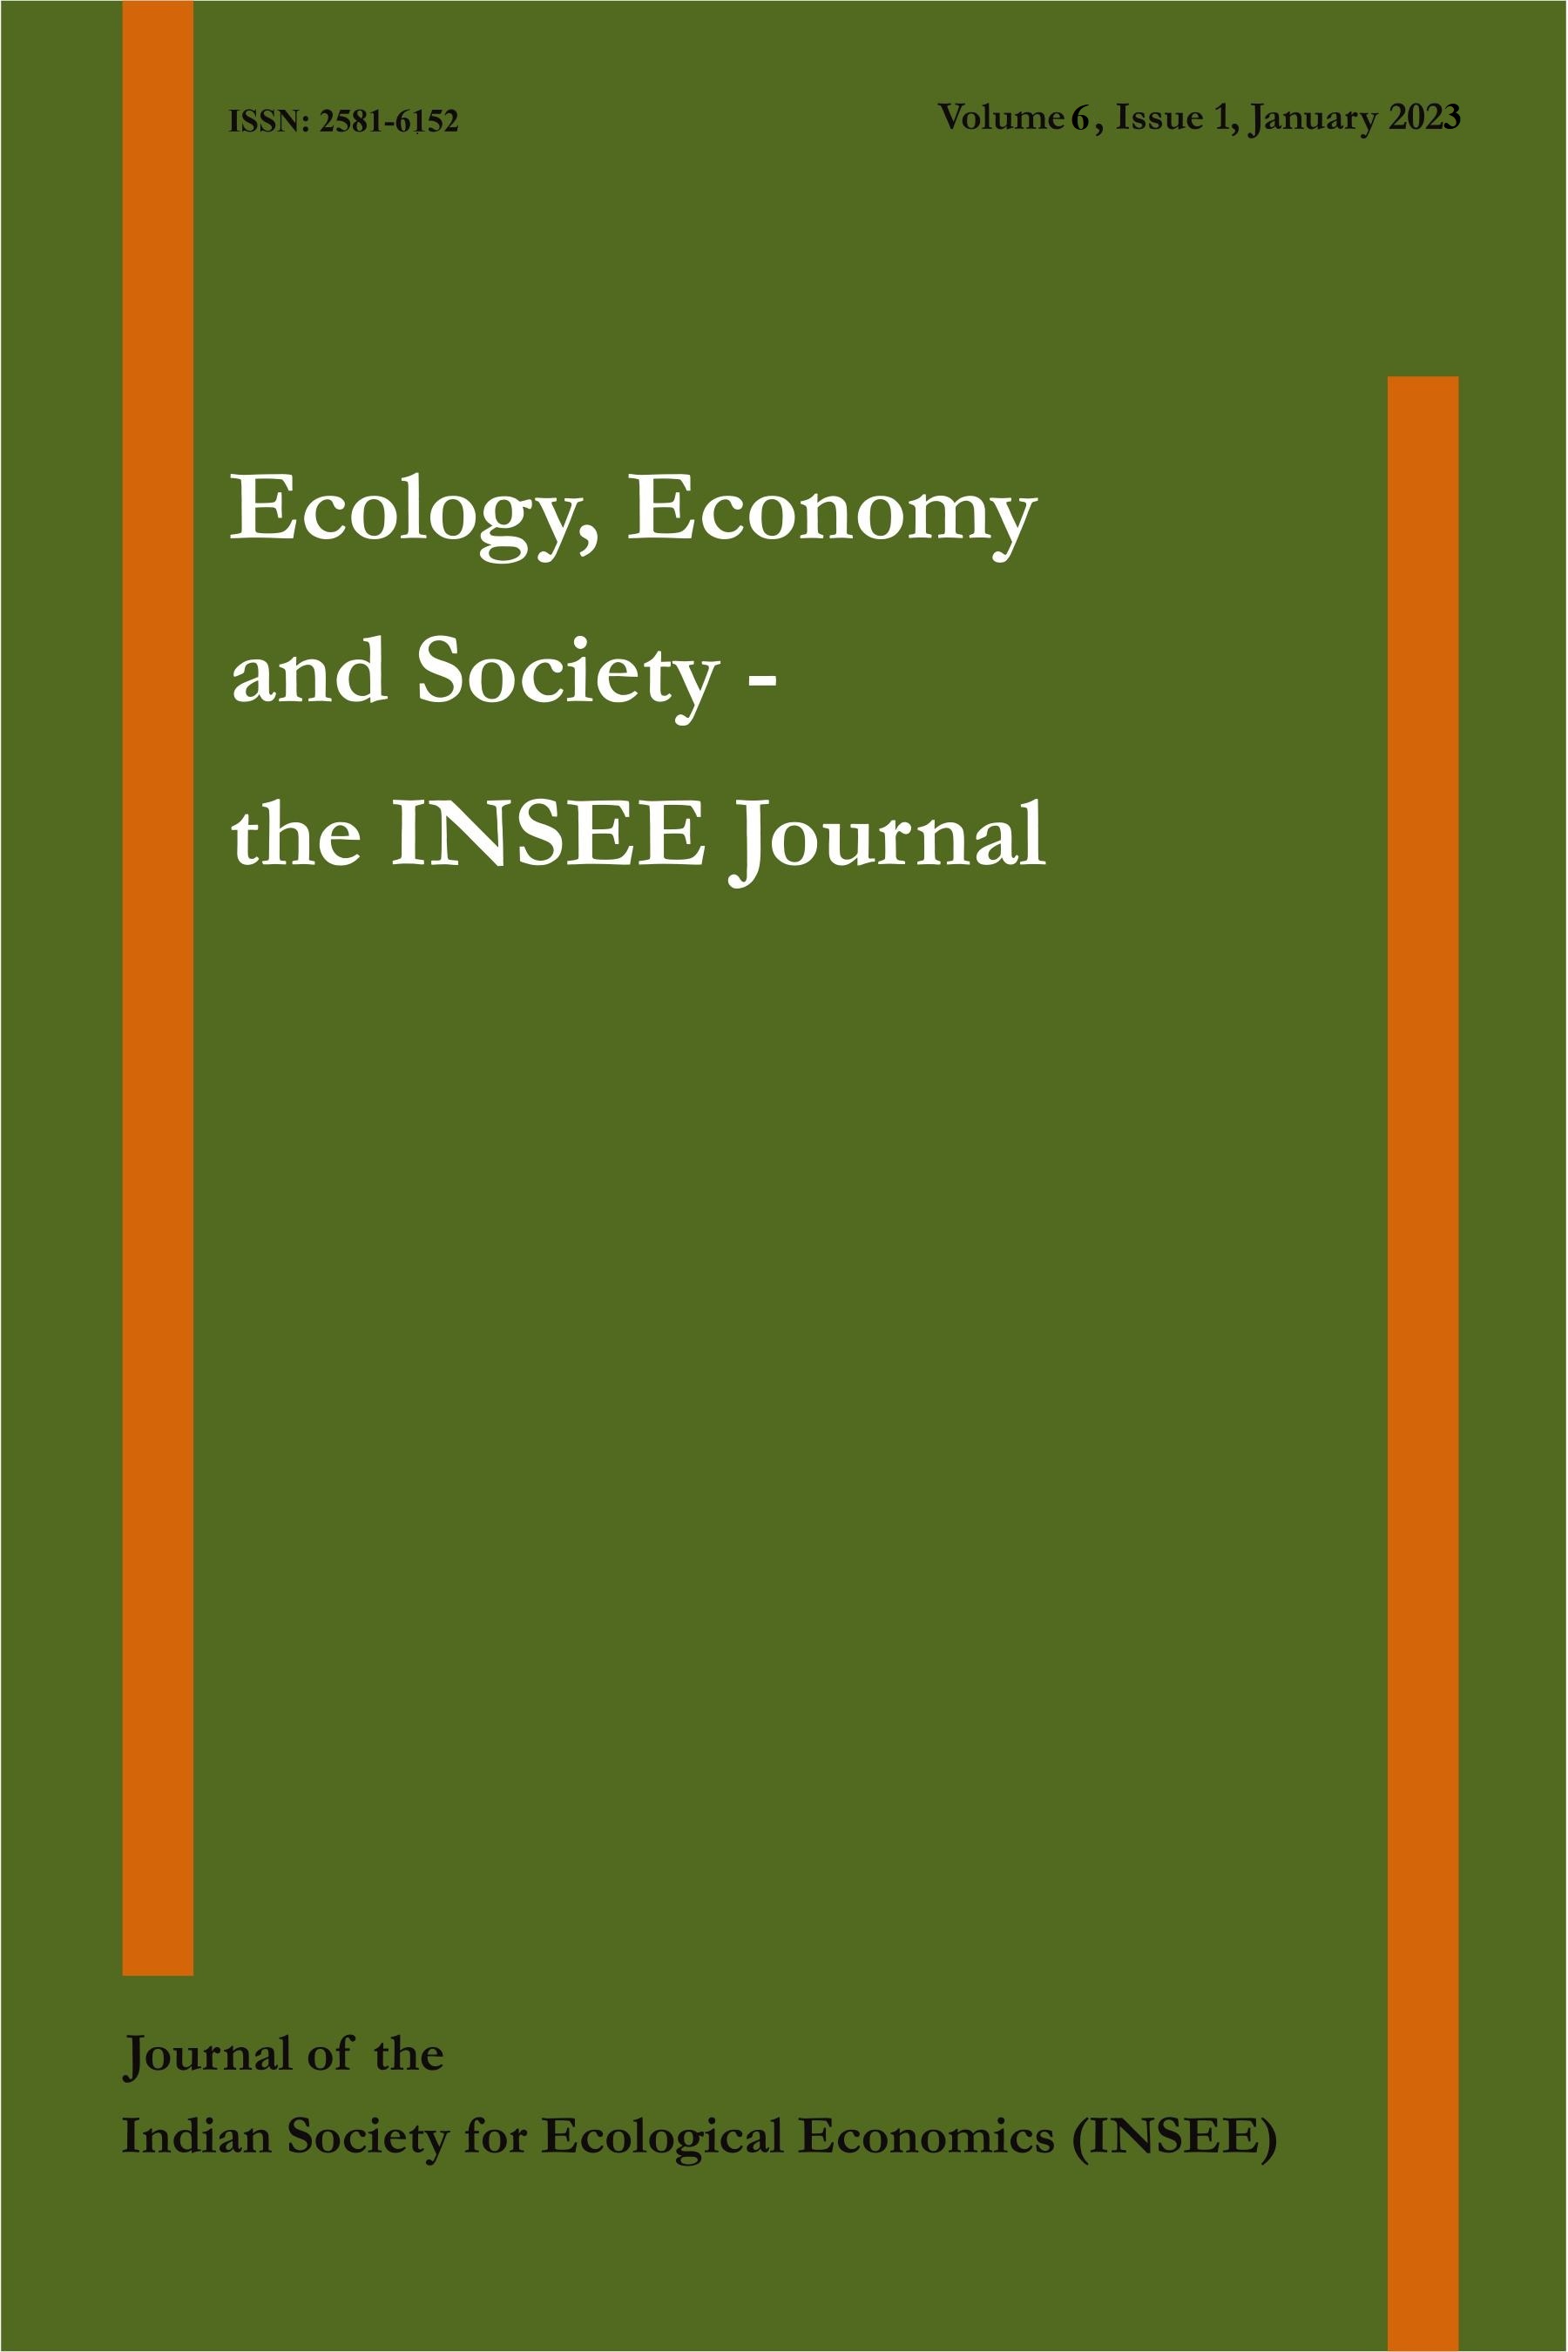 					View Vol. 6 No. 1 (2023): Ecology, Economy and Society--the INSEE Journal
				